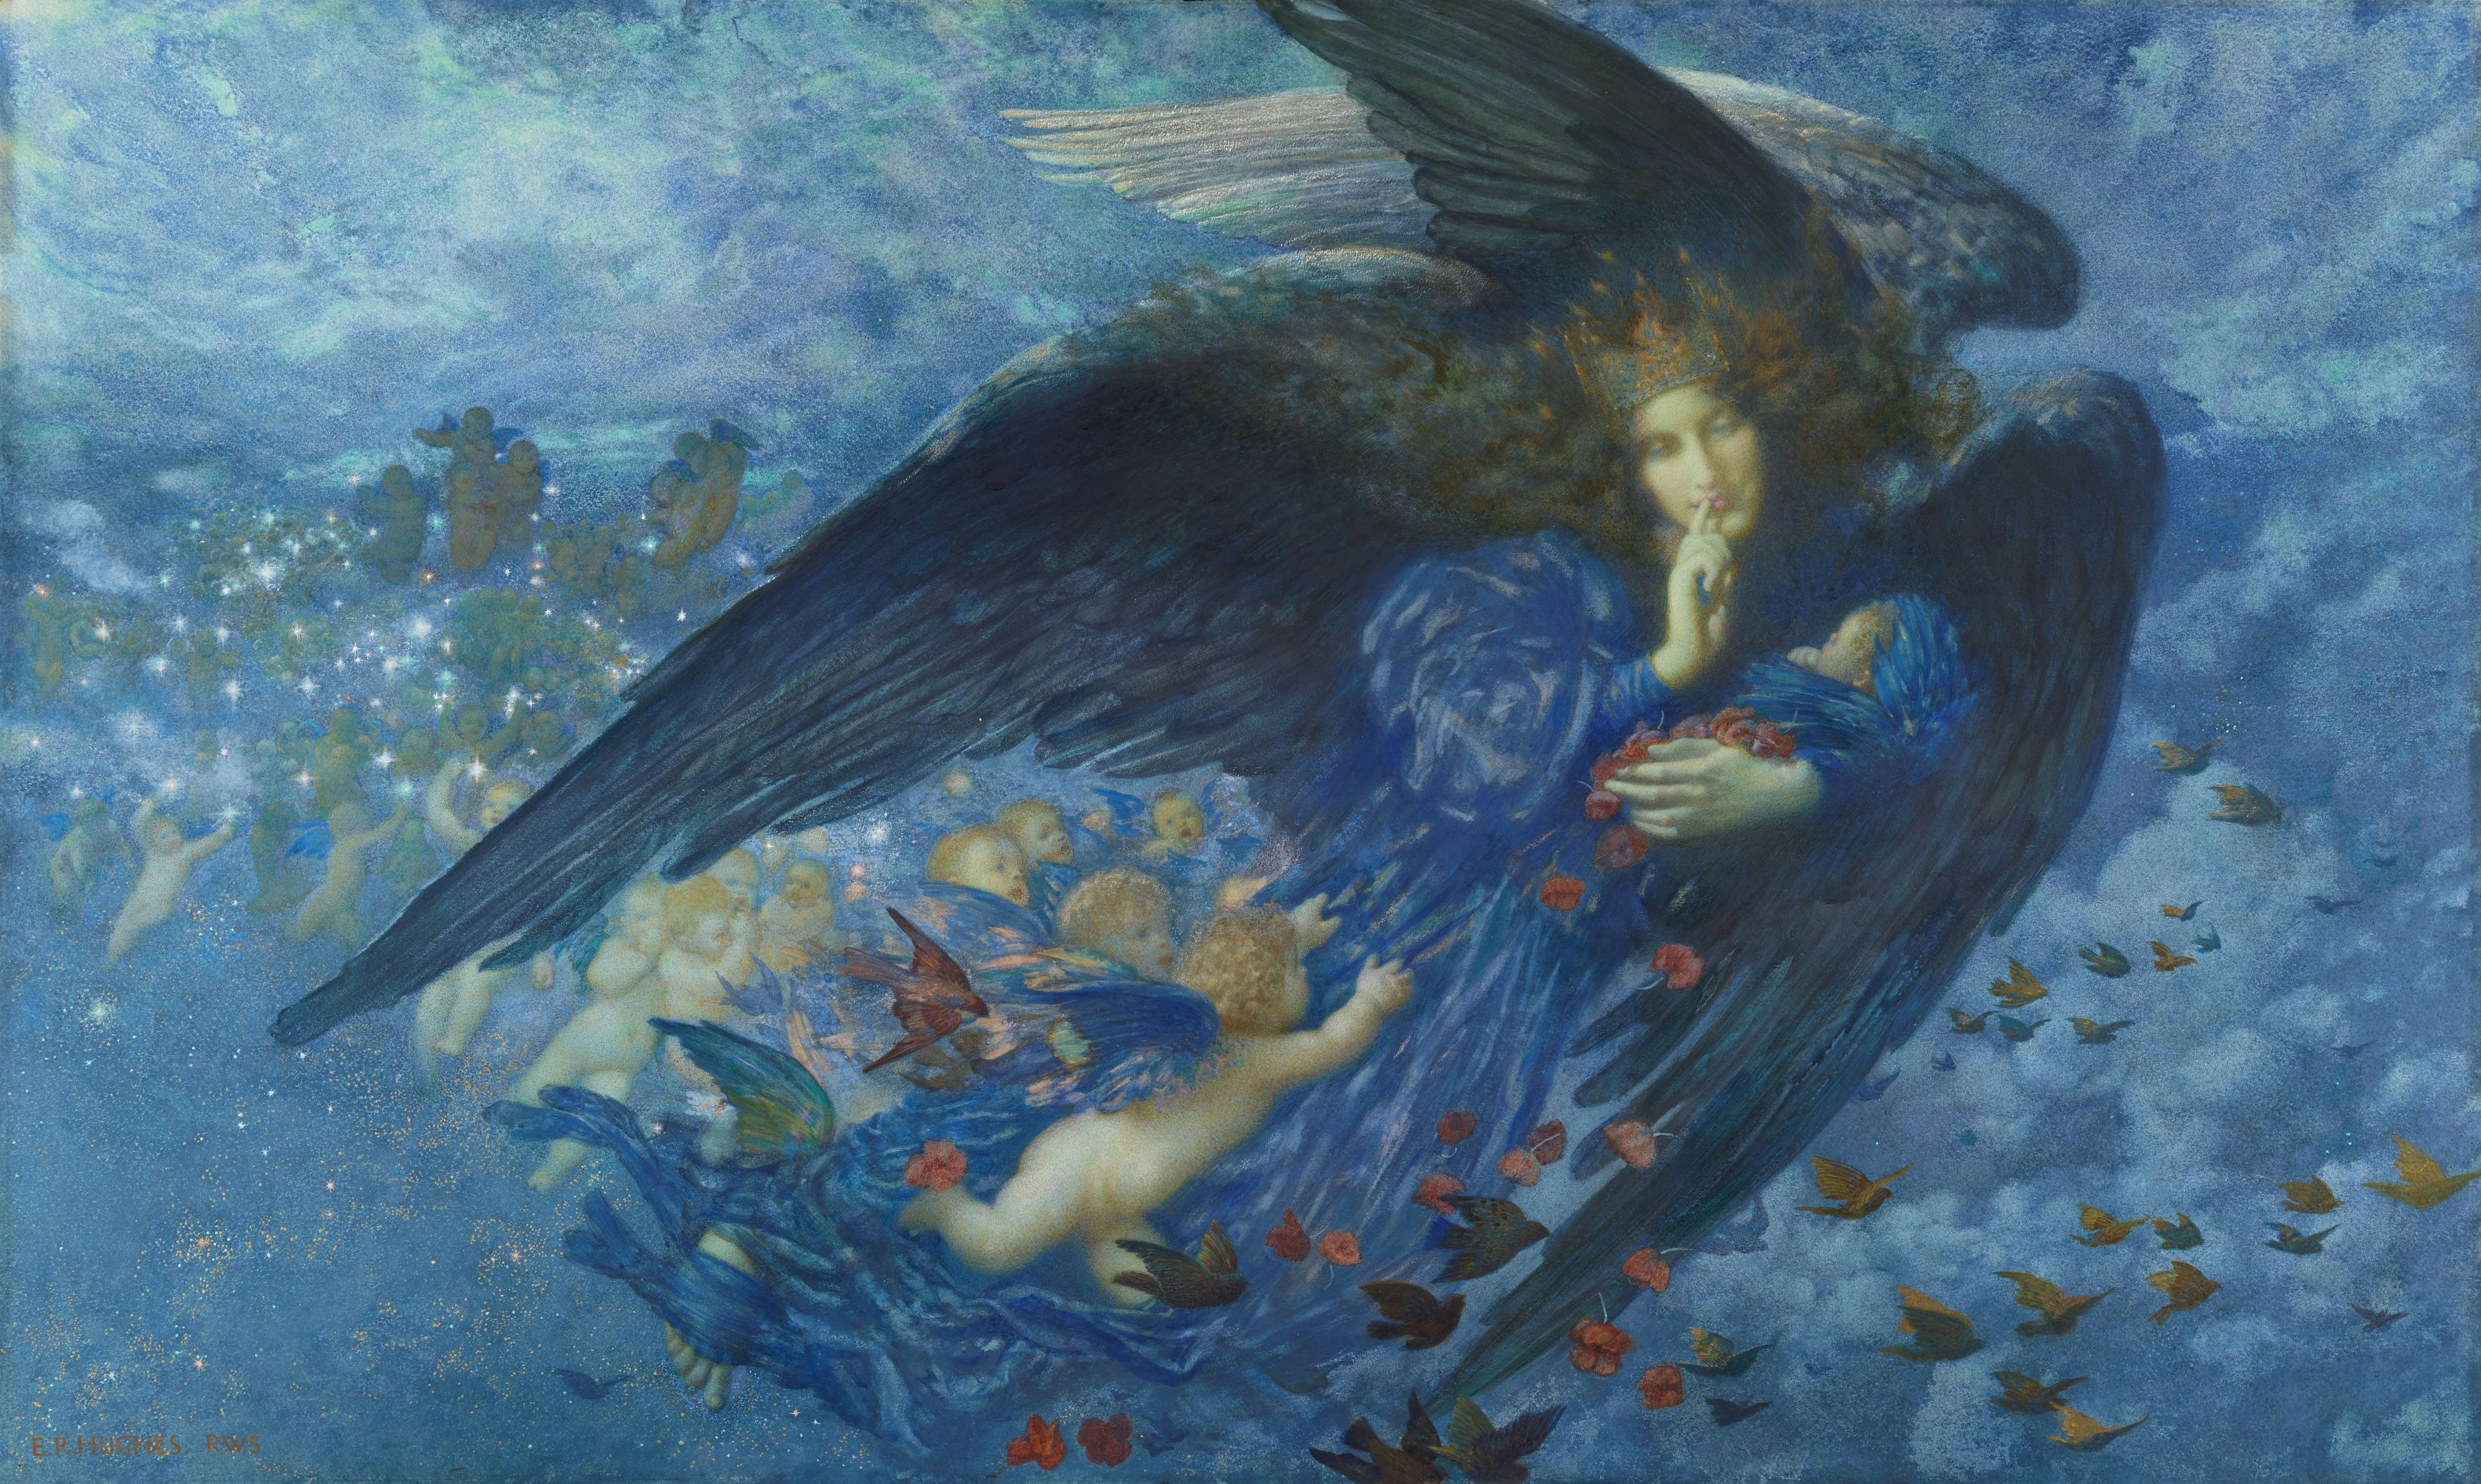 Night with her Train of Stars, 1912
The painting's title is derived from W. E Henley's (1849-1903) poem 'Margaritae Sorori' (Translates as 'Sister Margaret')
Artist: E.R.Hughes (Edward Robert Hughes)